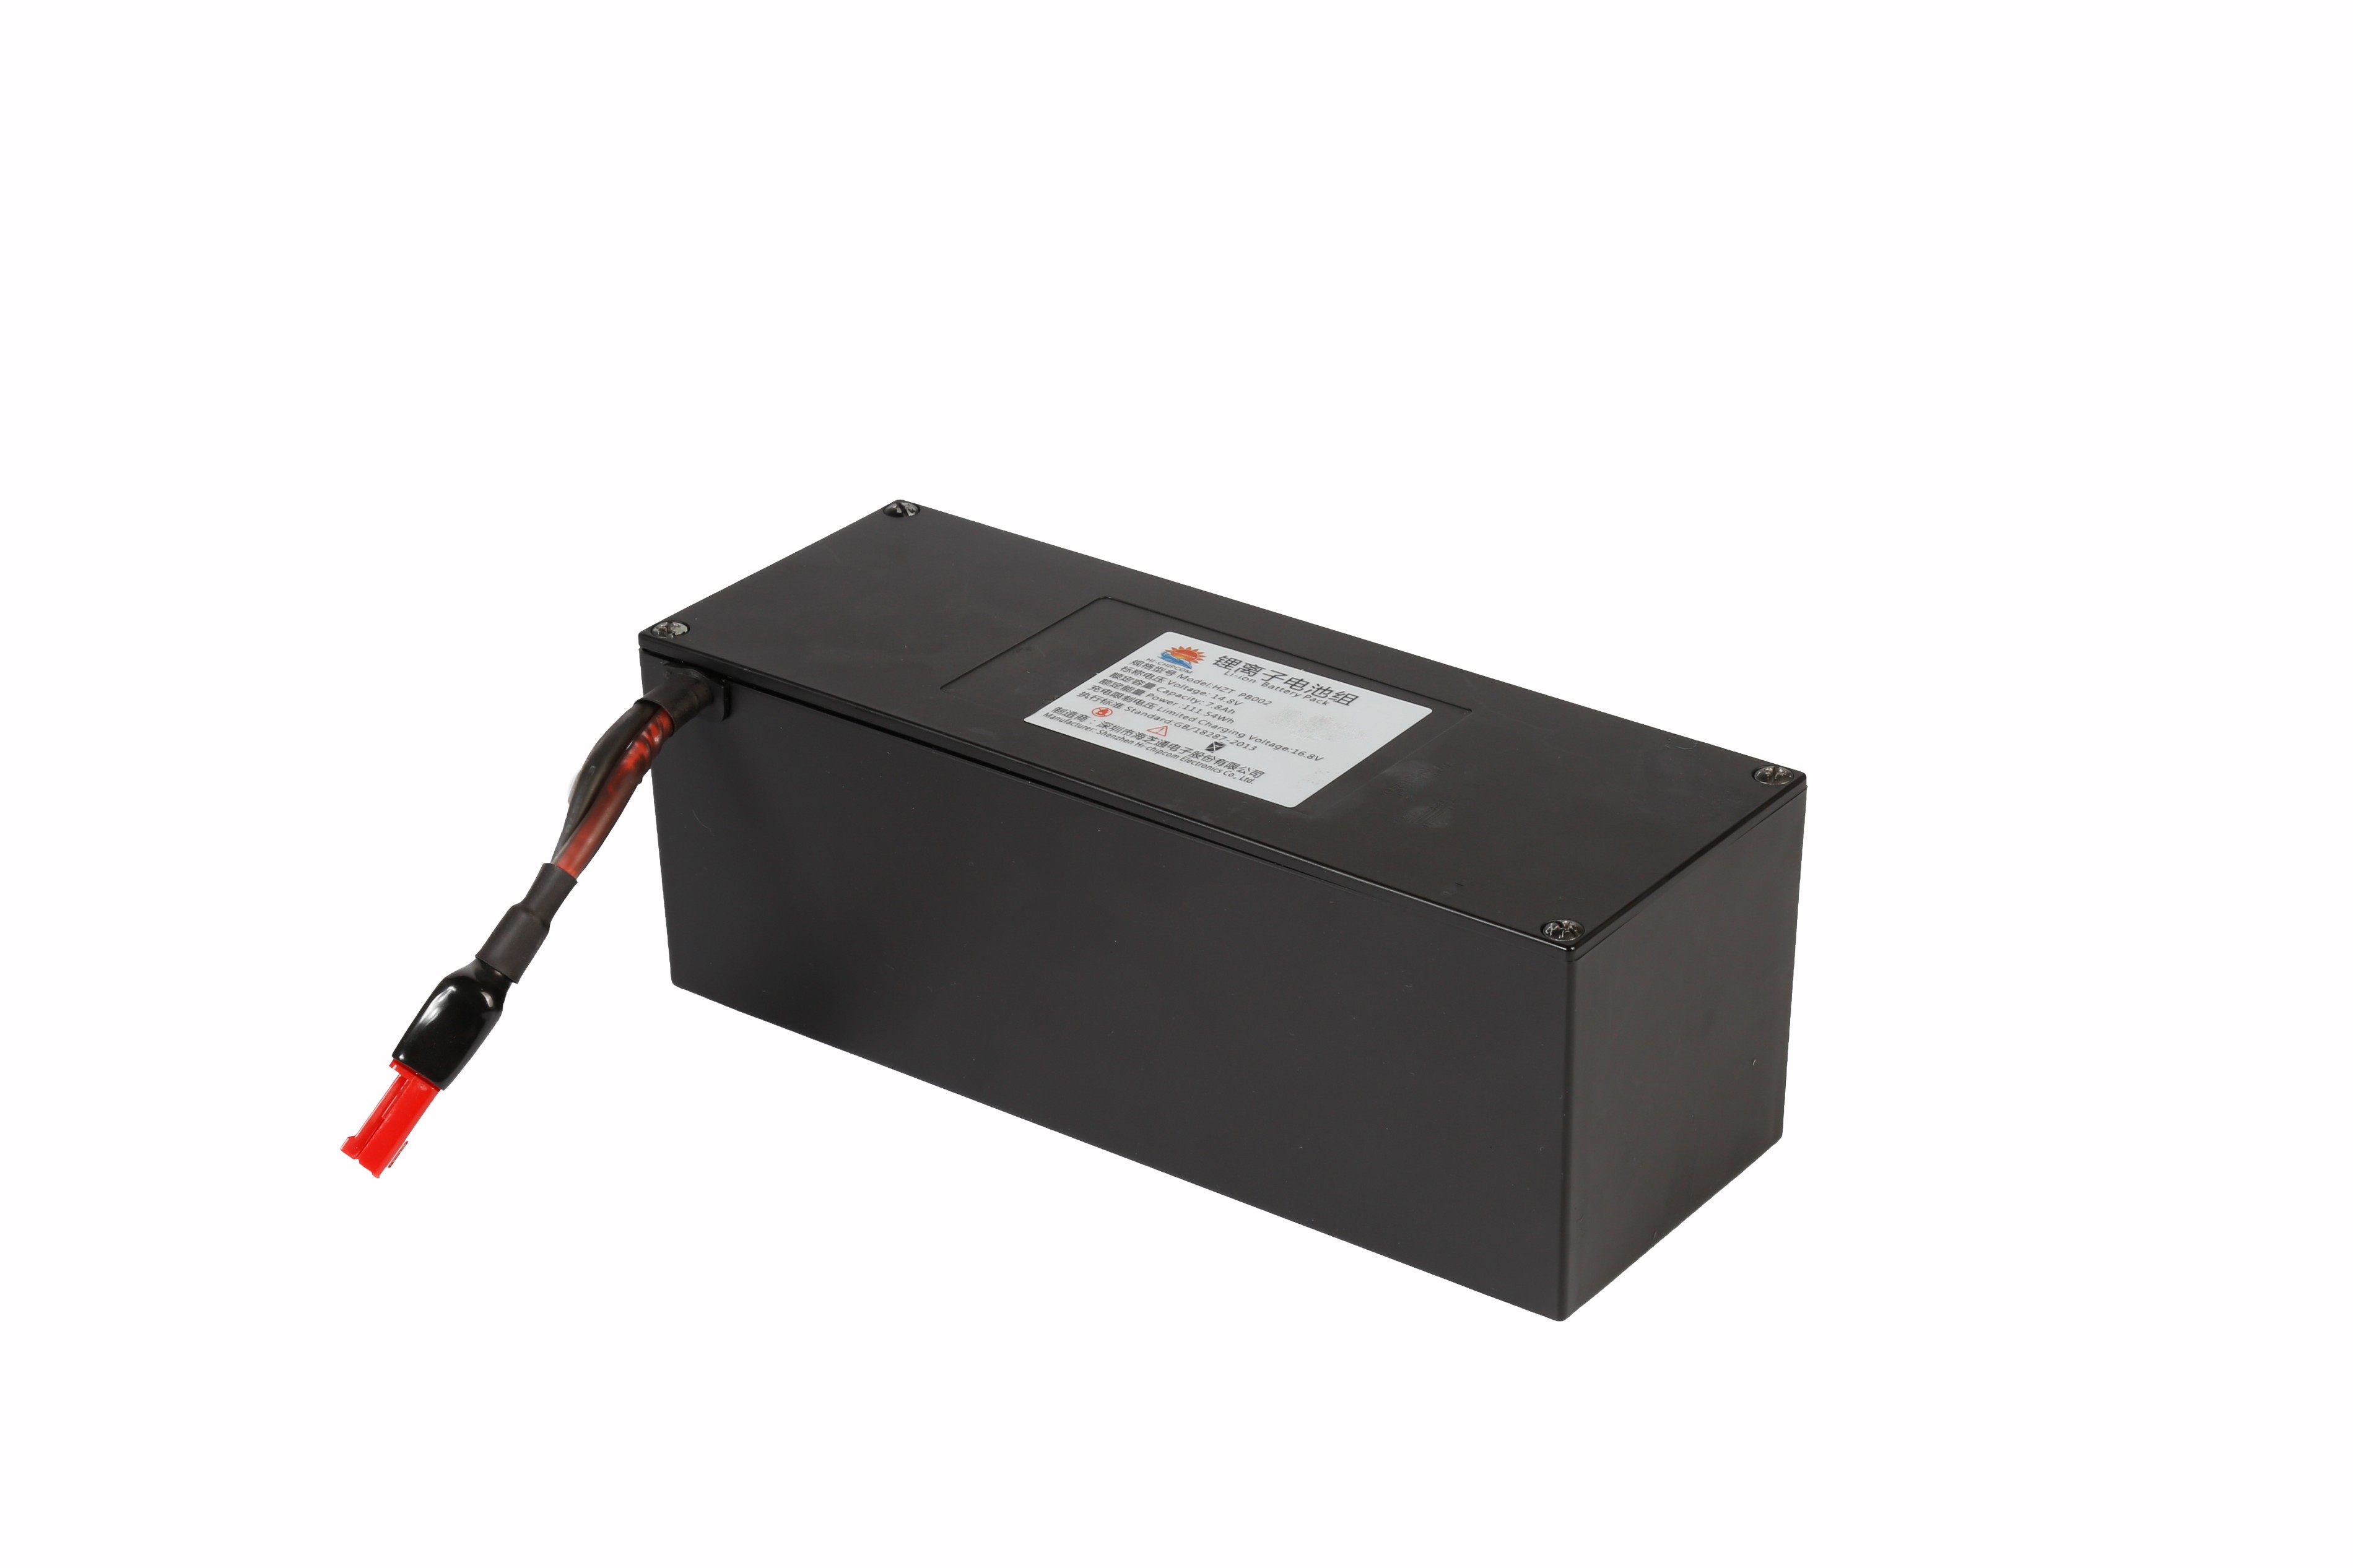 Forklift electronic scale battery